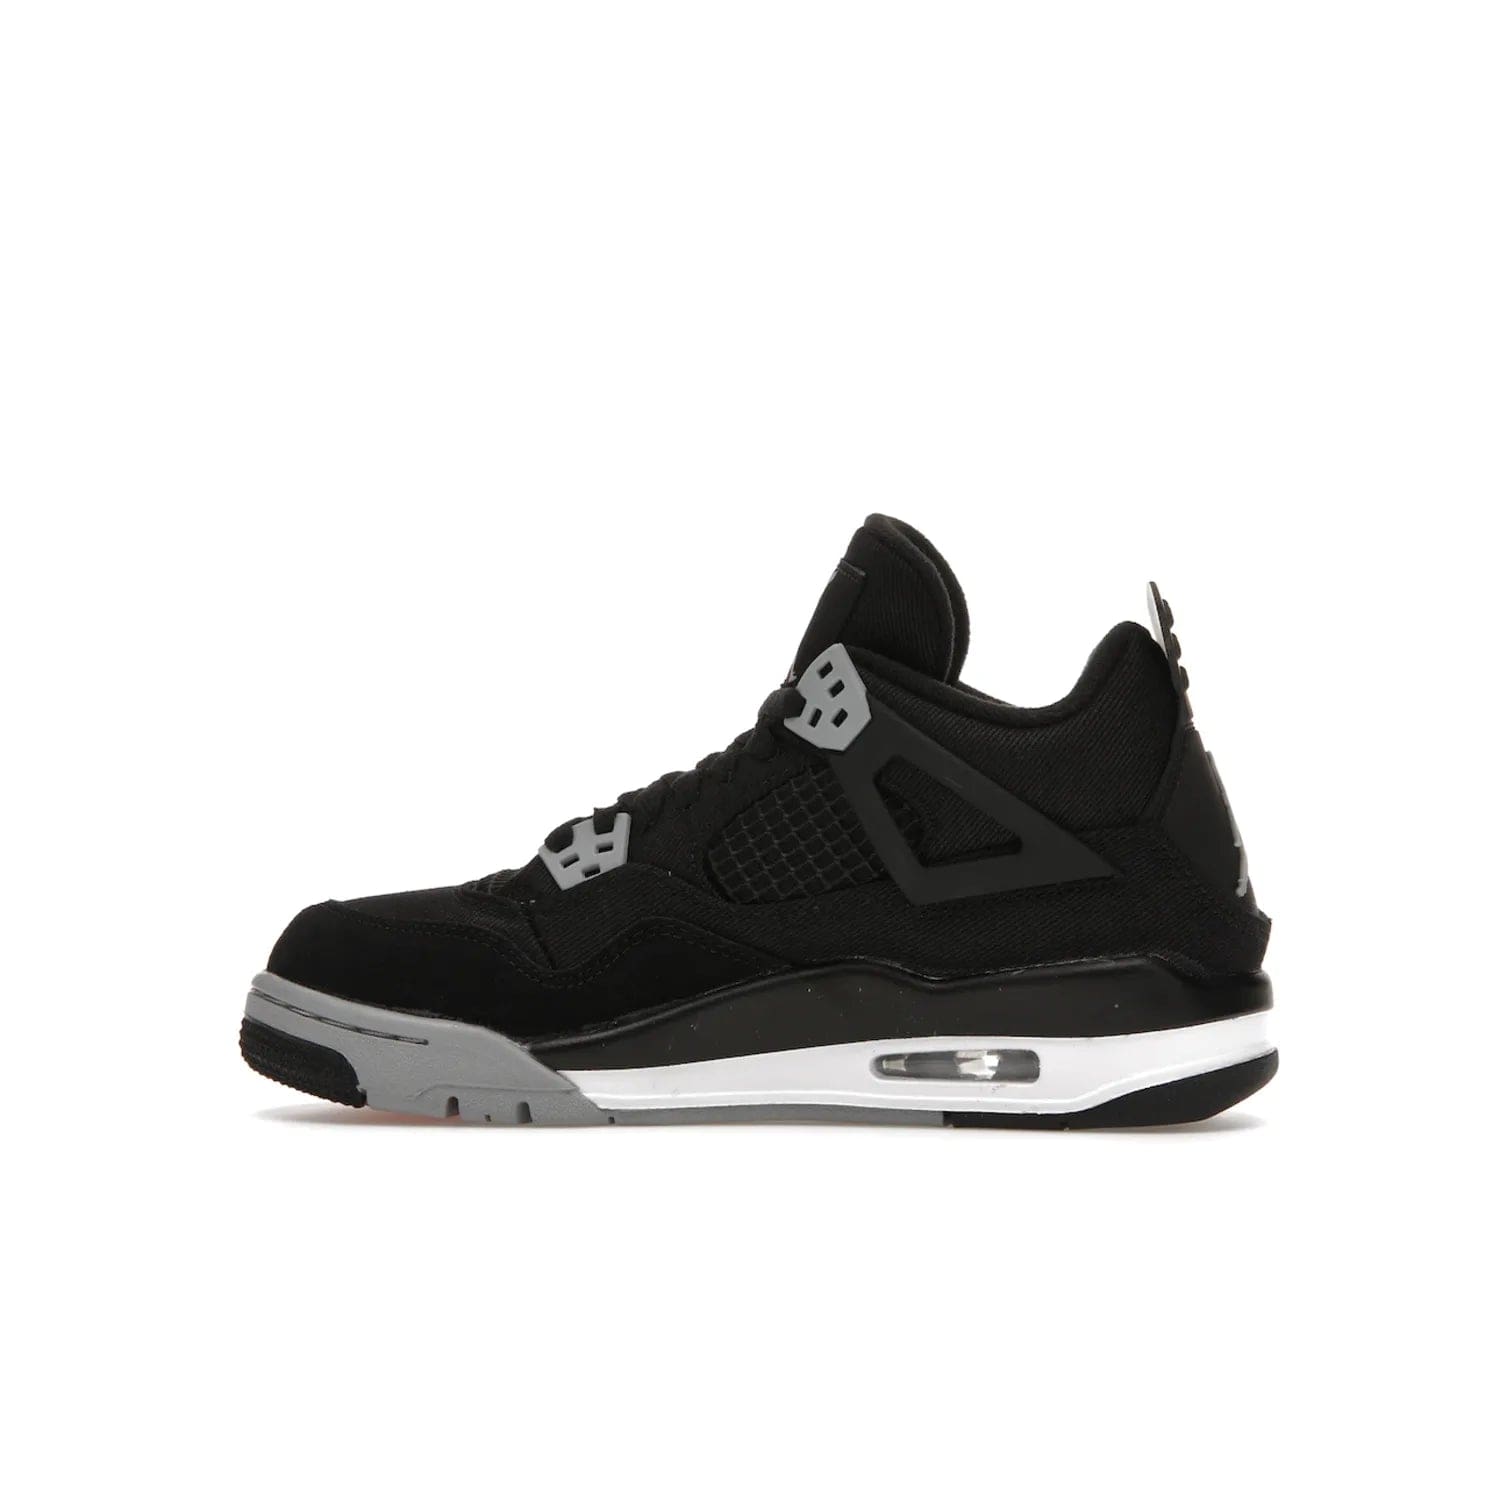 Jordan 4 Retro Black Canvas (GS) - Image 20 - Only at www.BallersClubKickz.com - Premium Air Jordan 4 Retro Black Canvas in grade-schooler's catalog. Featuring black suede canvas upper, grey molding, accents in red, white midsole, woven Jumpman tag, & visible AIR cushioning. Releasing Oct. 1, 2022.